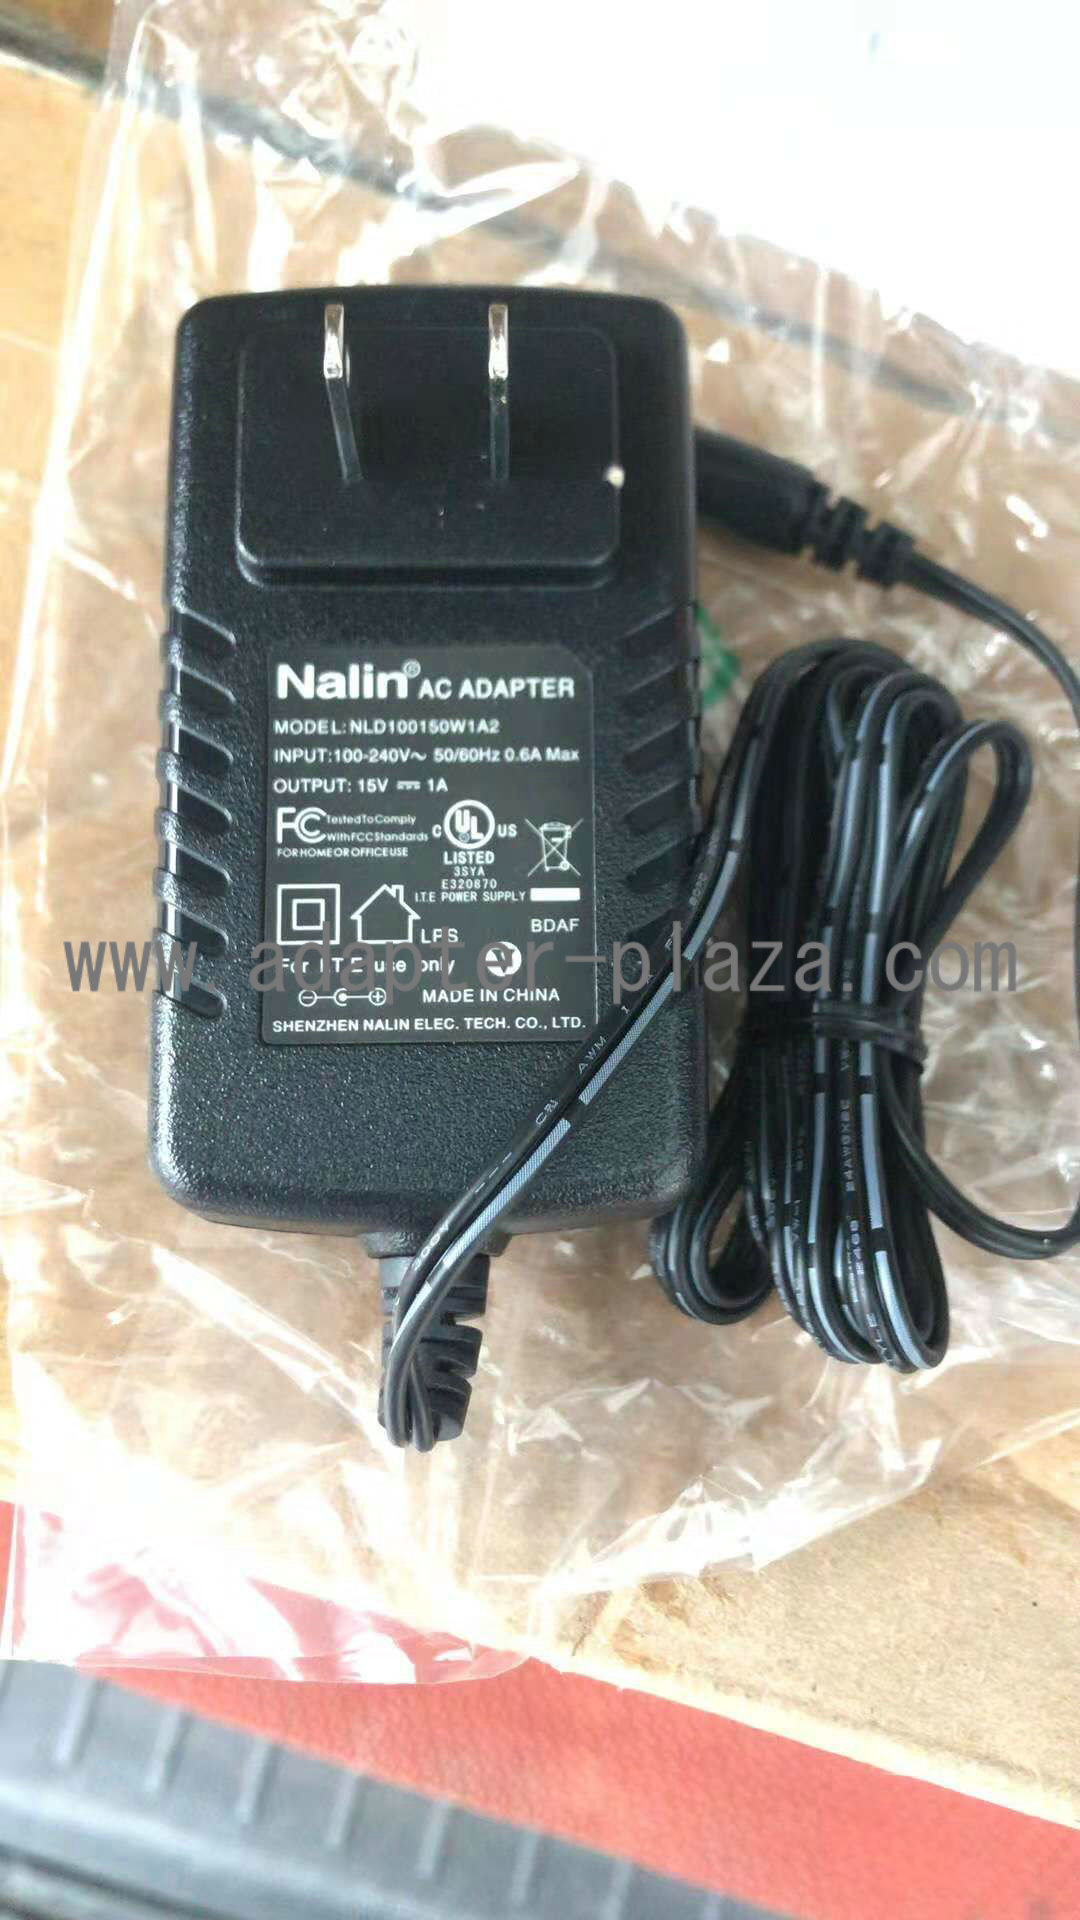 *Brand NEW* Nalin NLD100150W1A2 15V 1A AC DC Adapter POWER SUPPLY - Click Image to Close